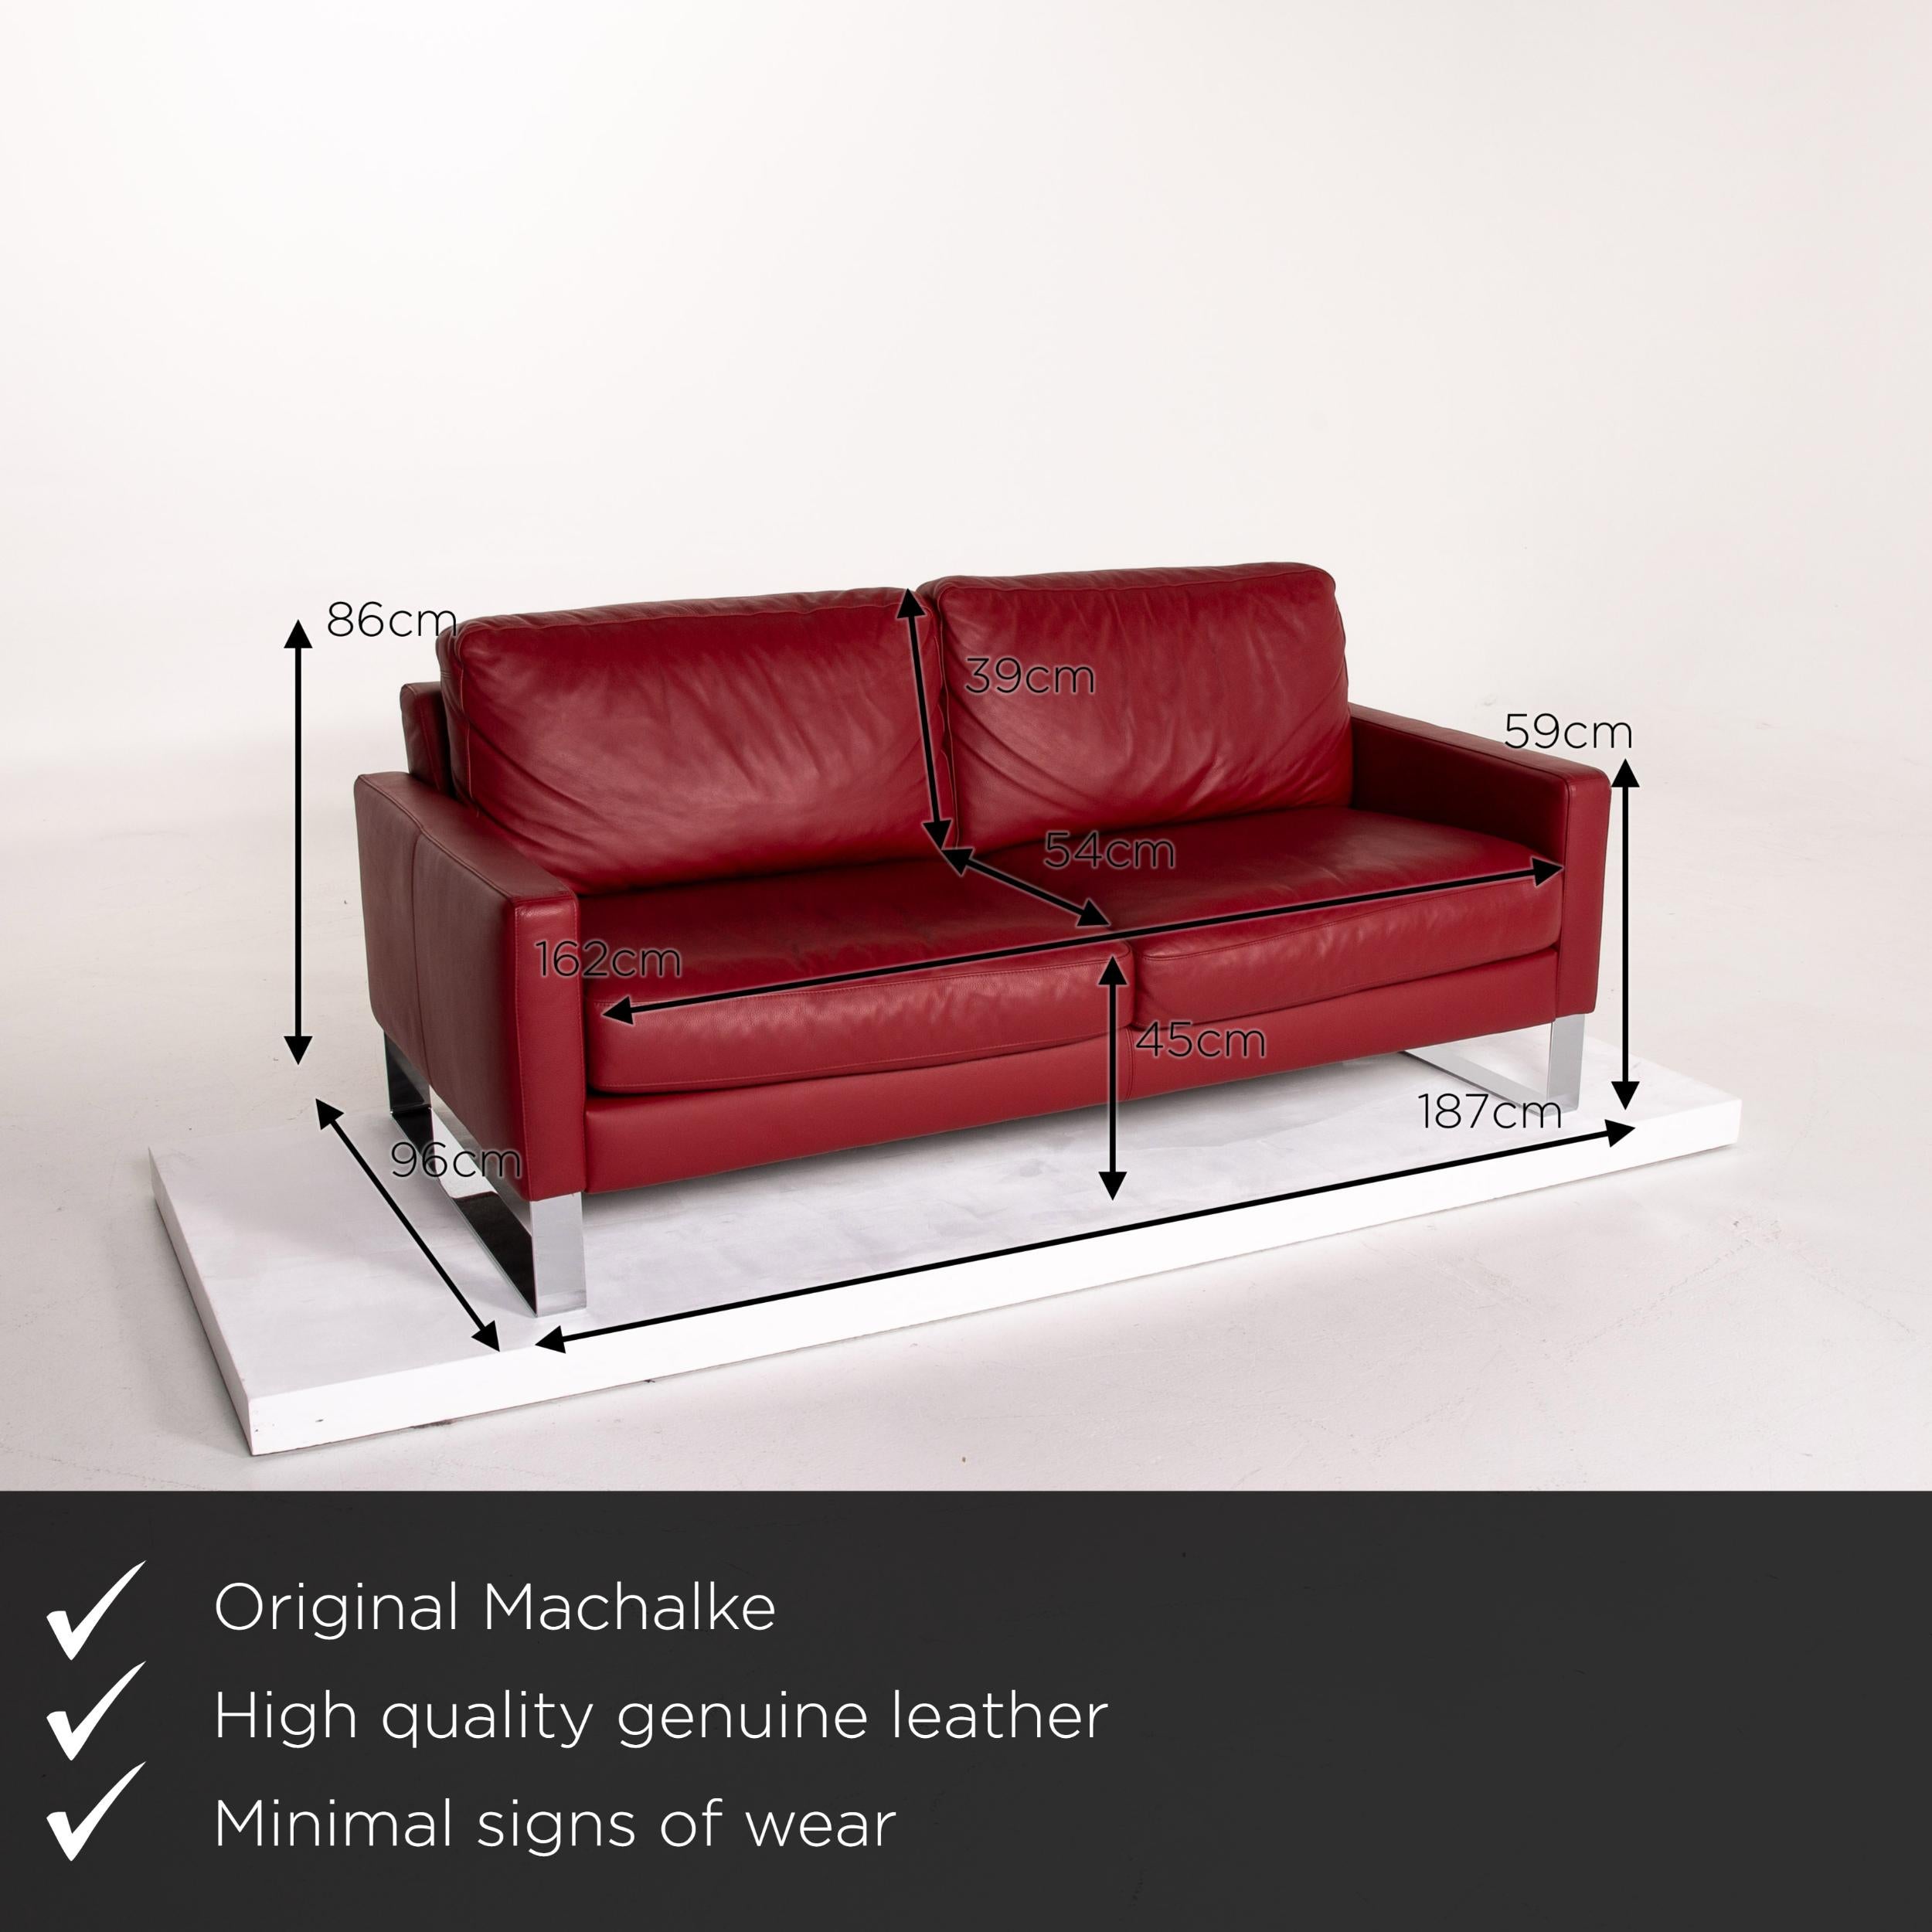 Bosnian Machalke Leather Sofa Red Two-Seat Couch # 13906t